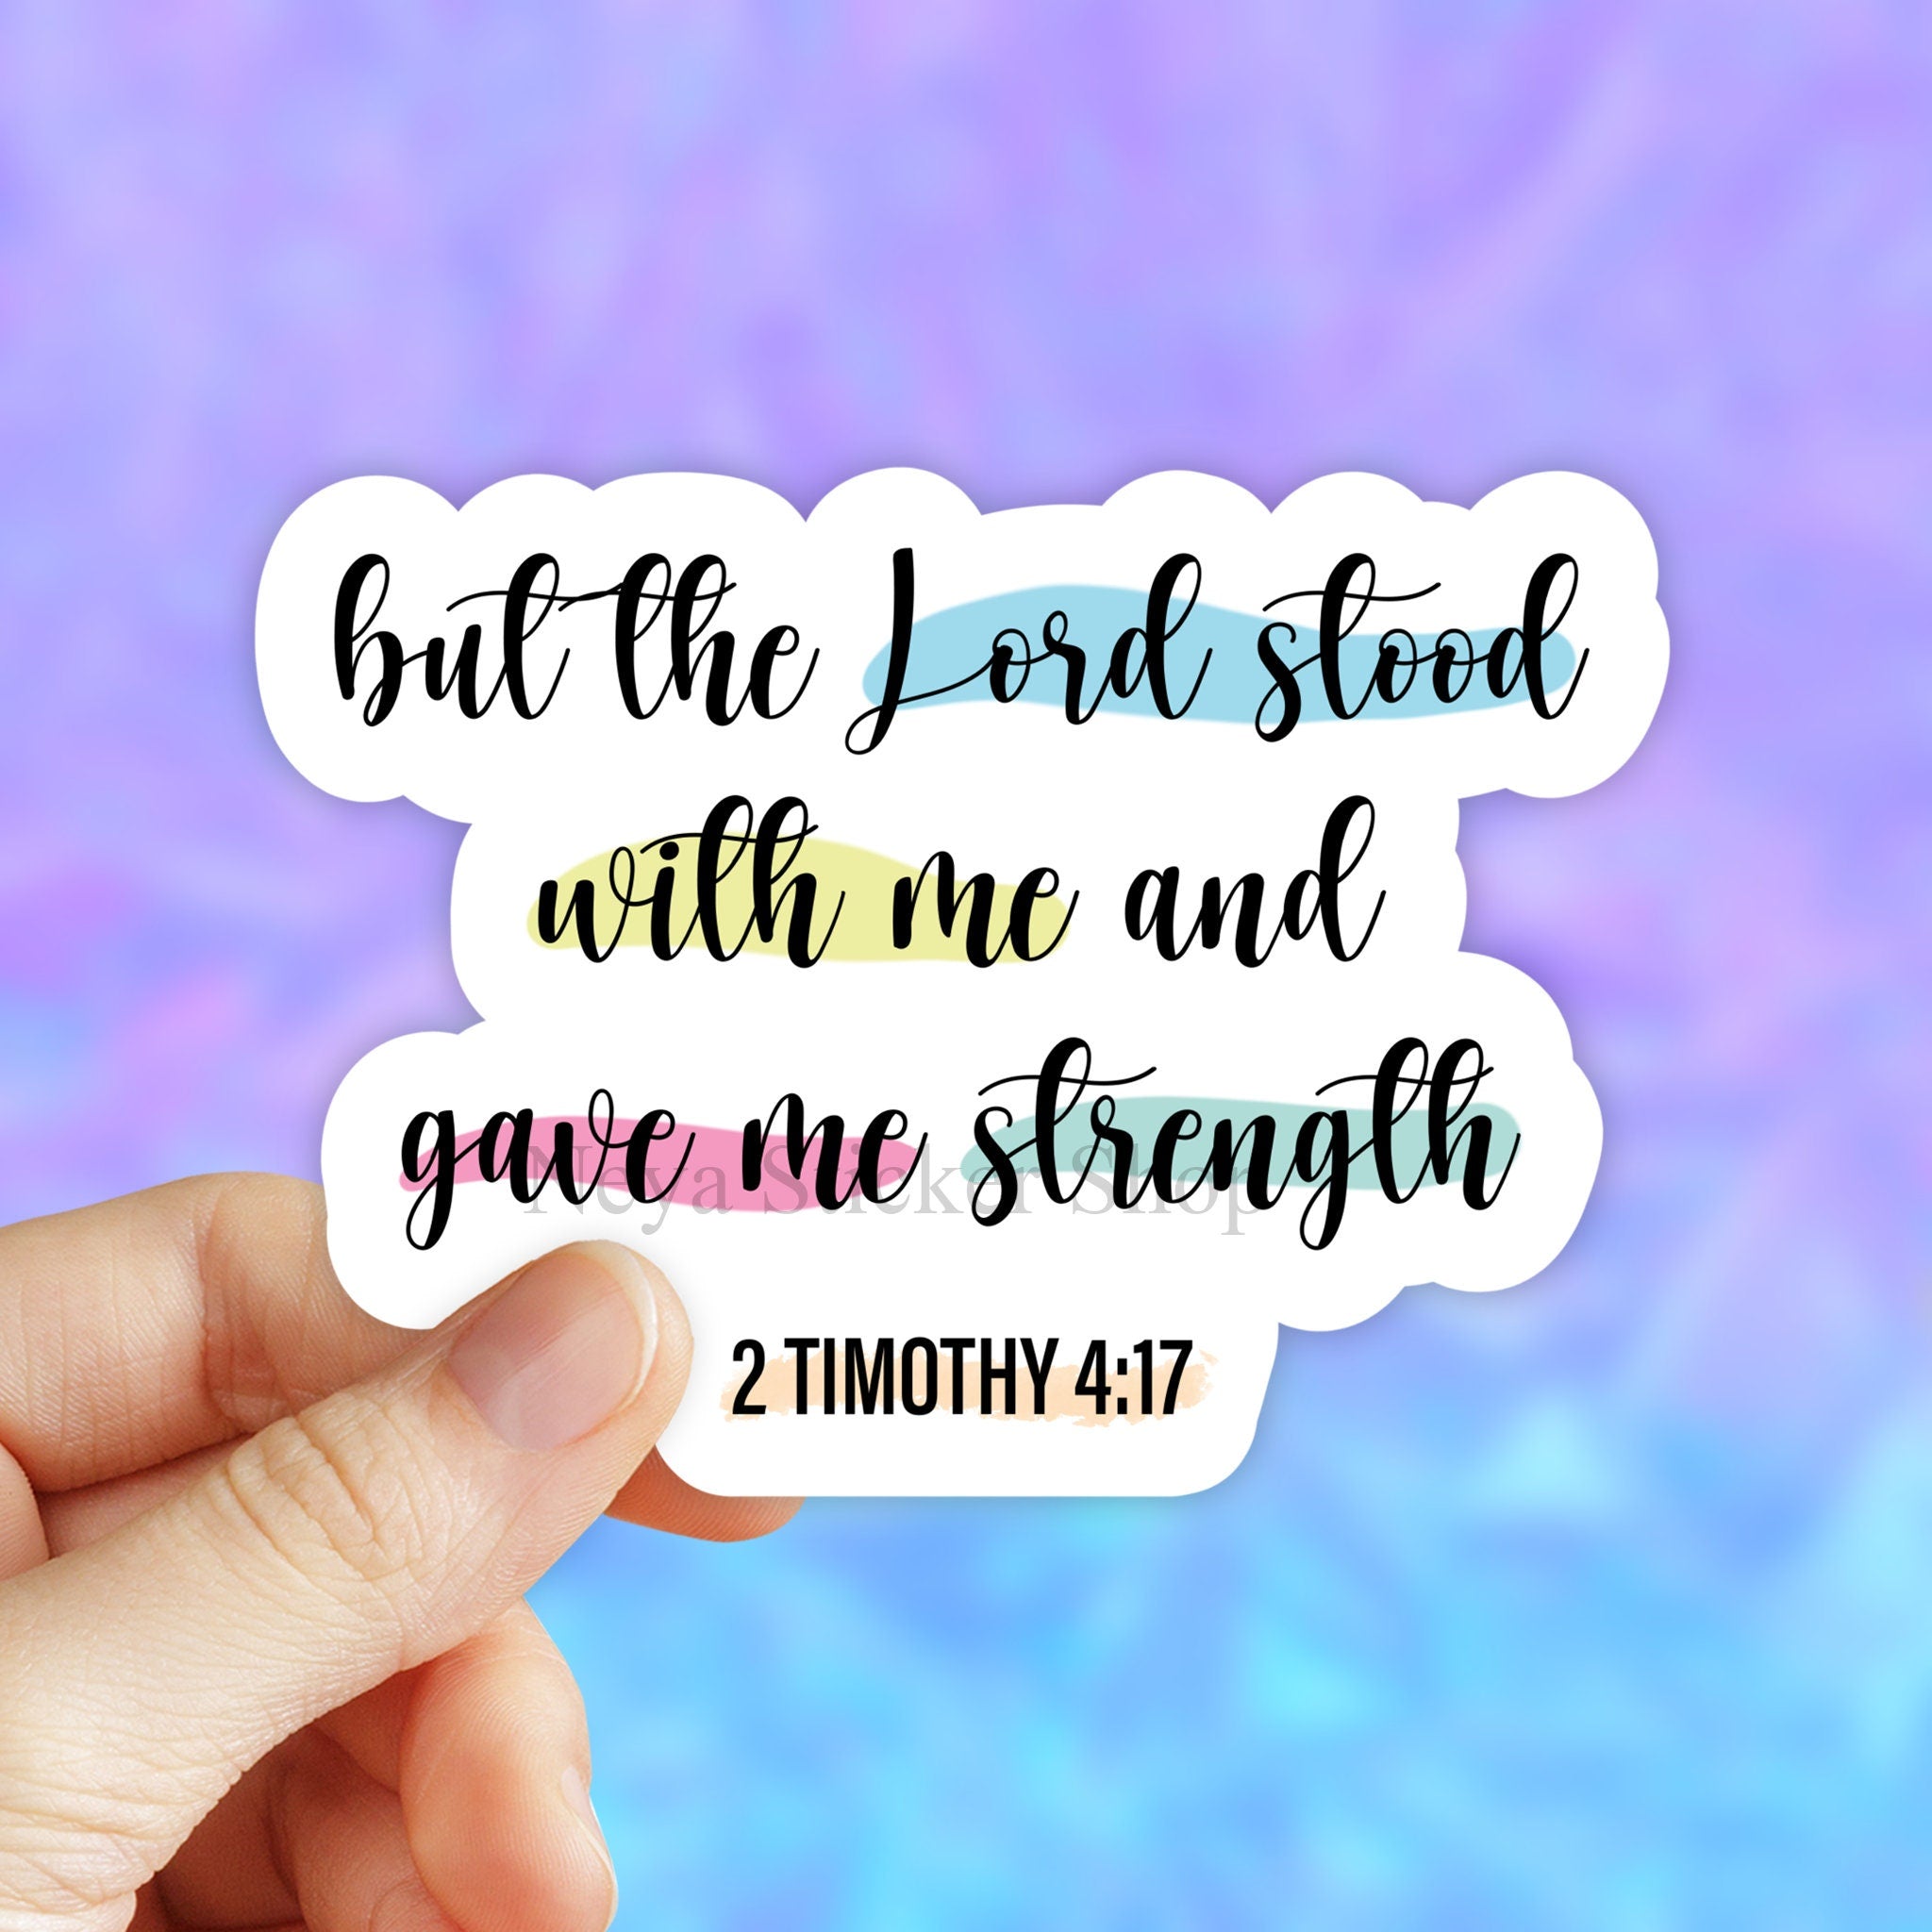 Faith Stickers, Bible Verse Stickers, Christian Stickers, God